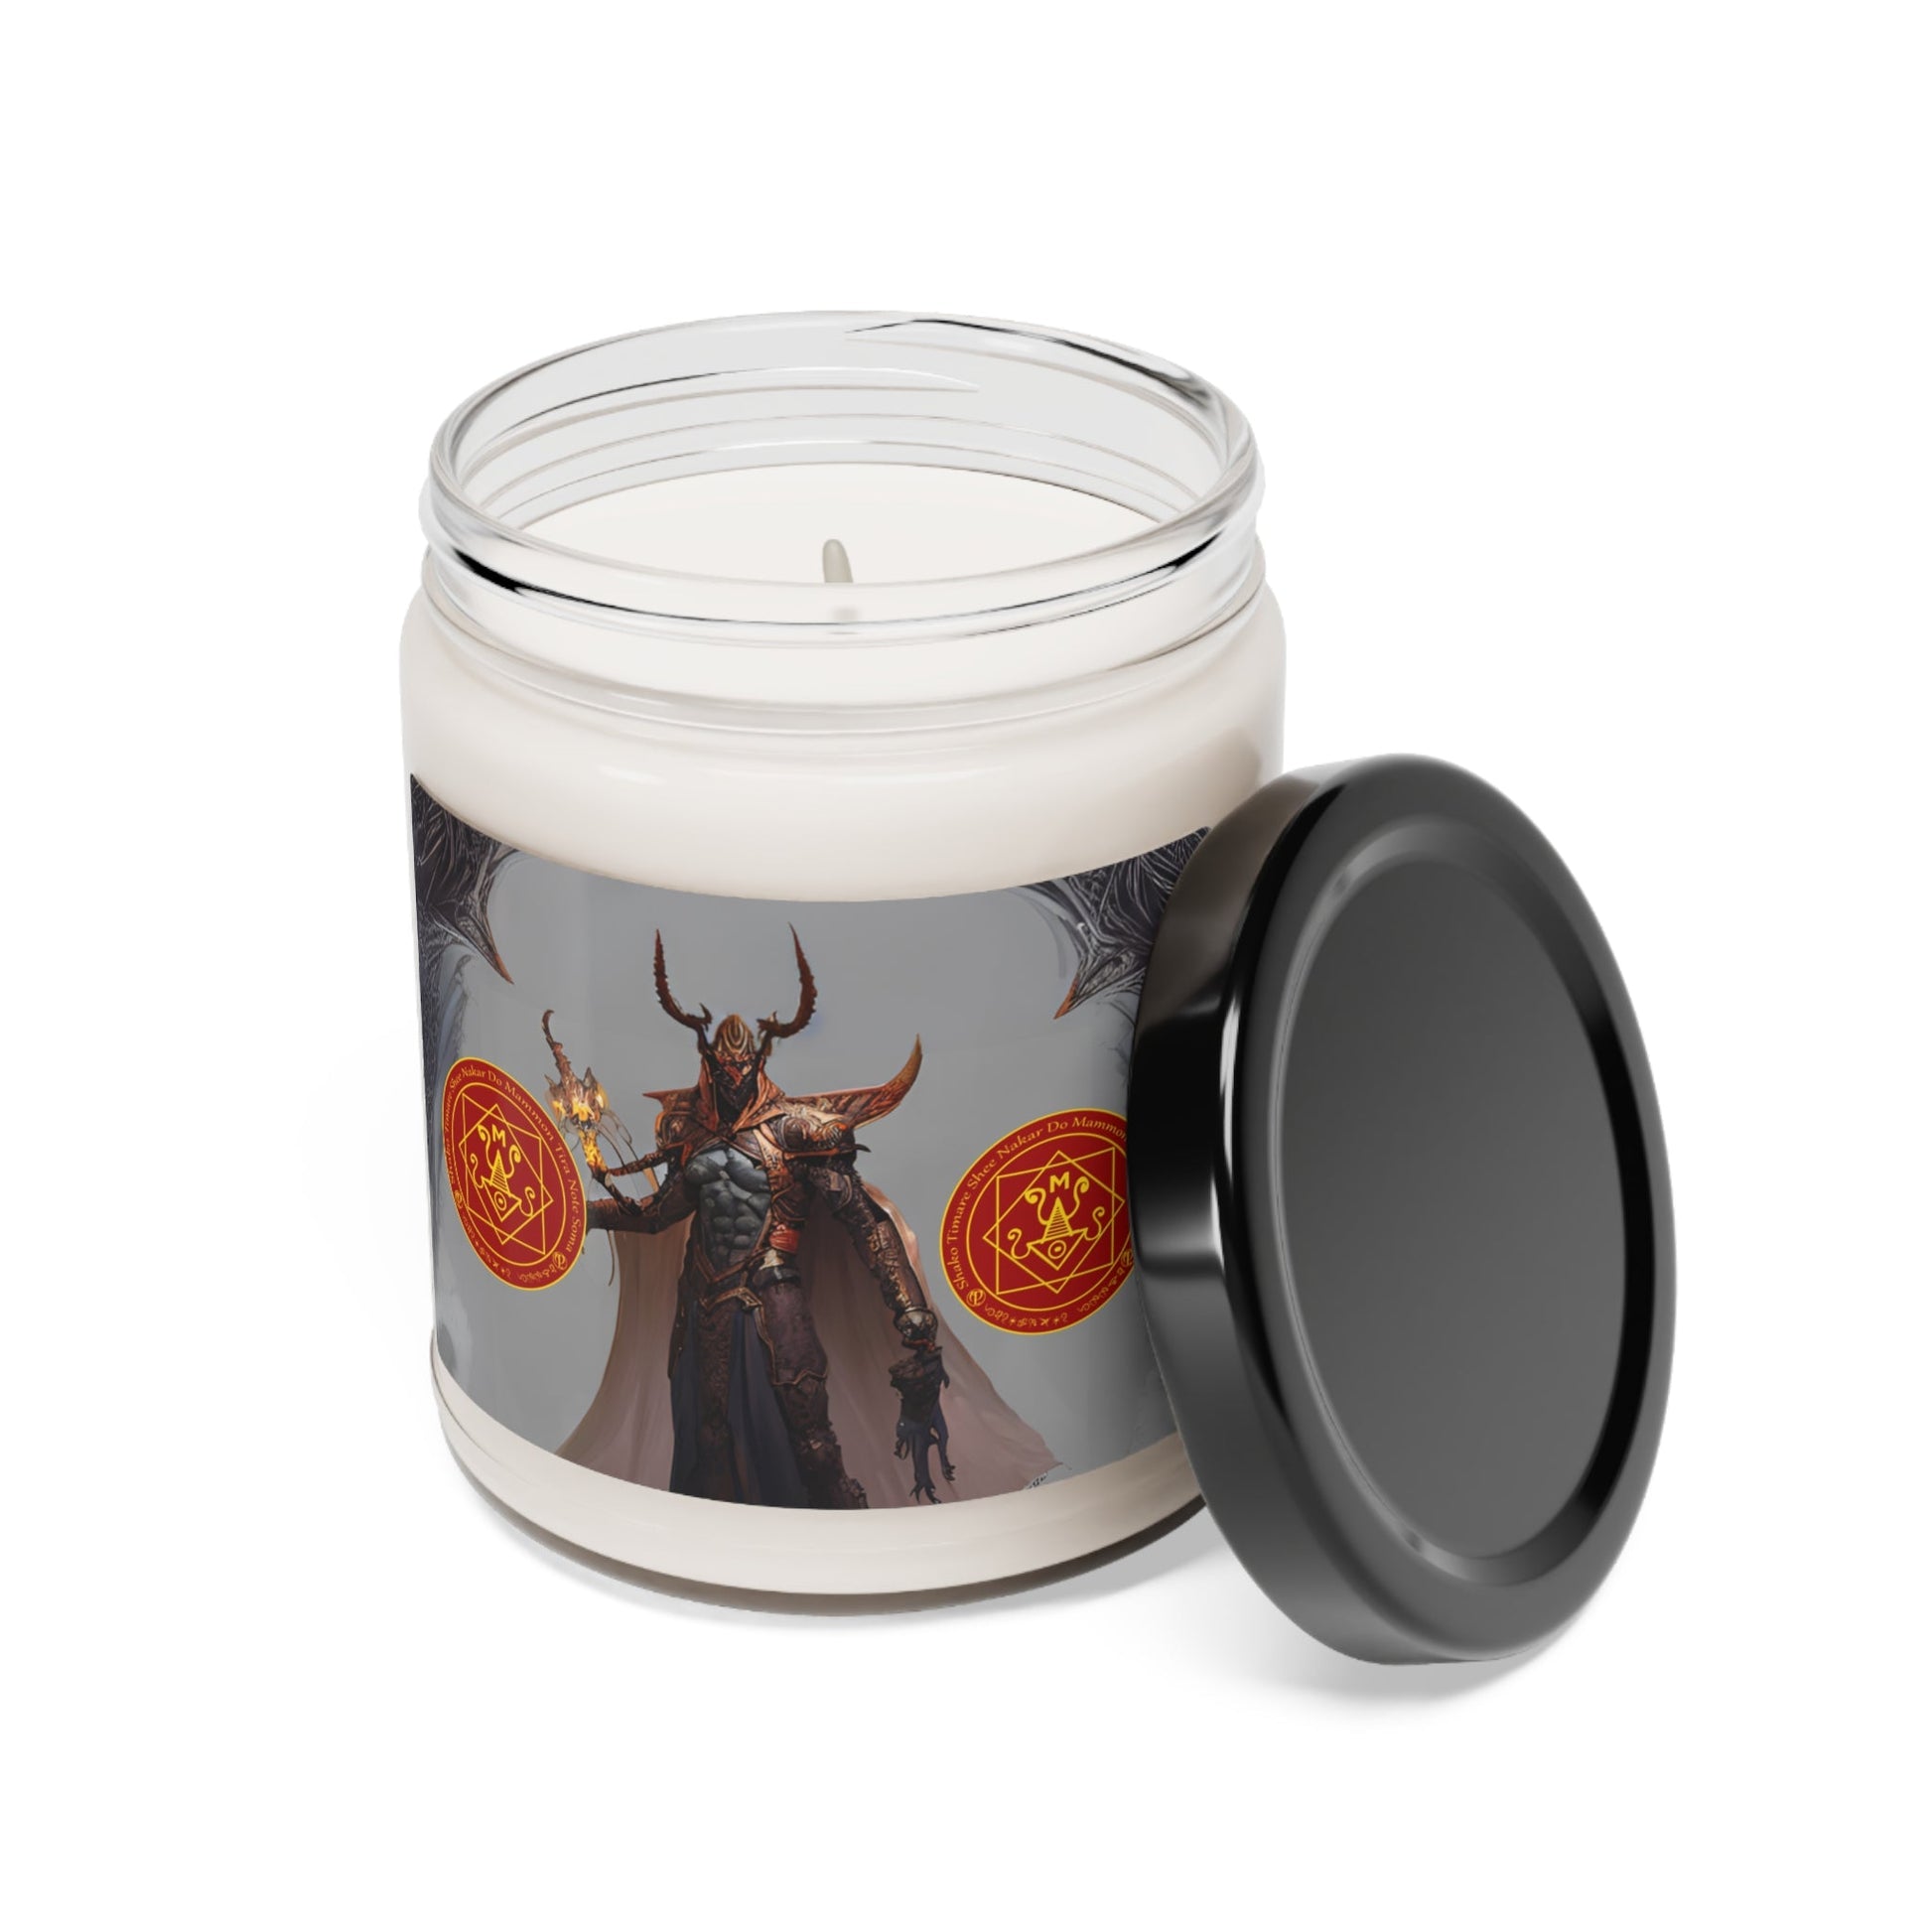 Demon-Mammon-Altar-Scented-Soy-Candle-for-Money-related-offerings-rituals-initiations-or-praying-and-meditation-22